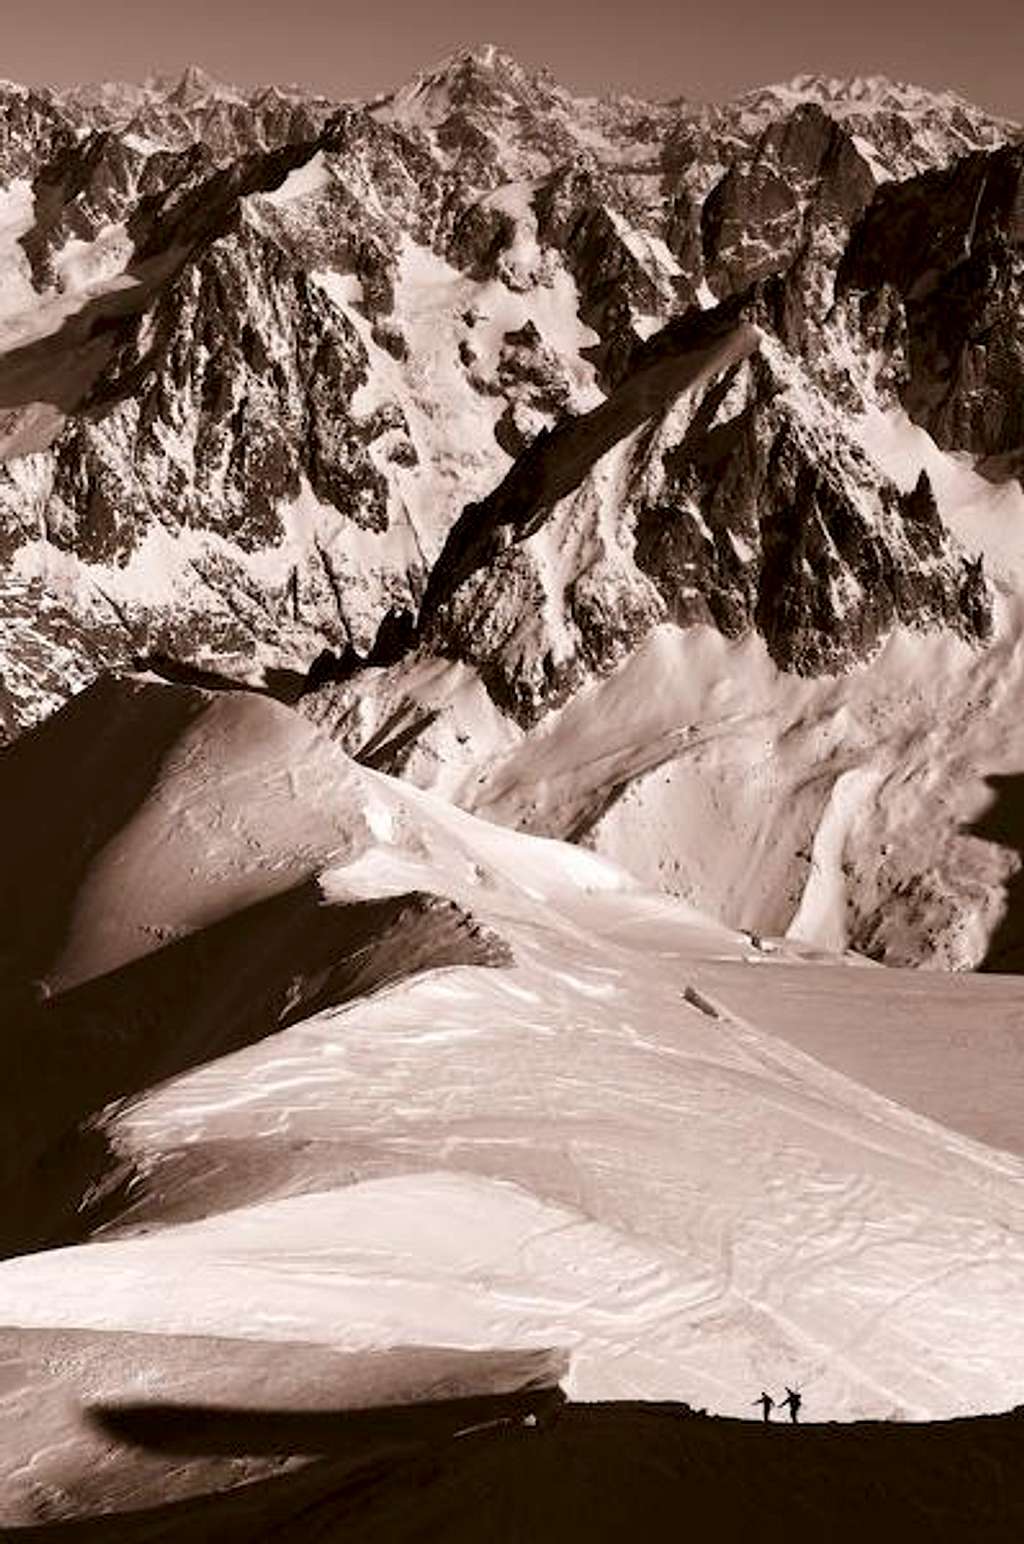 The Vallee Blanche